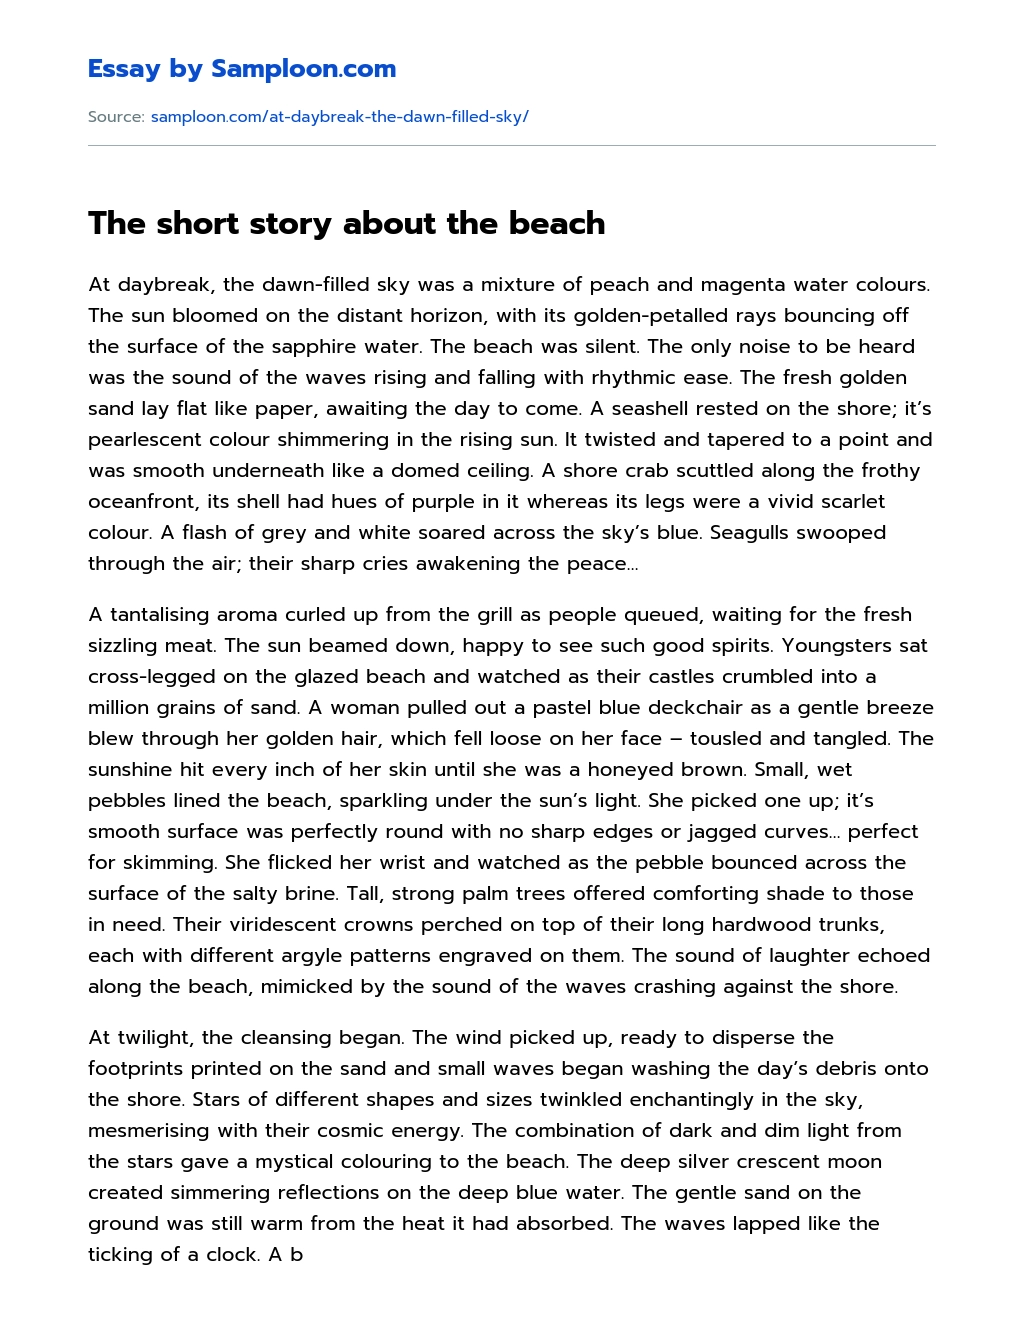 The short story about the beach essay